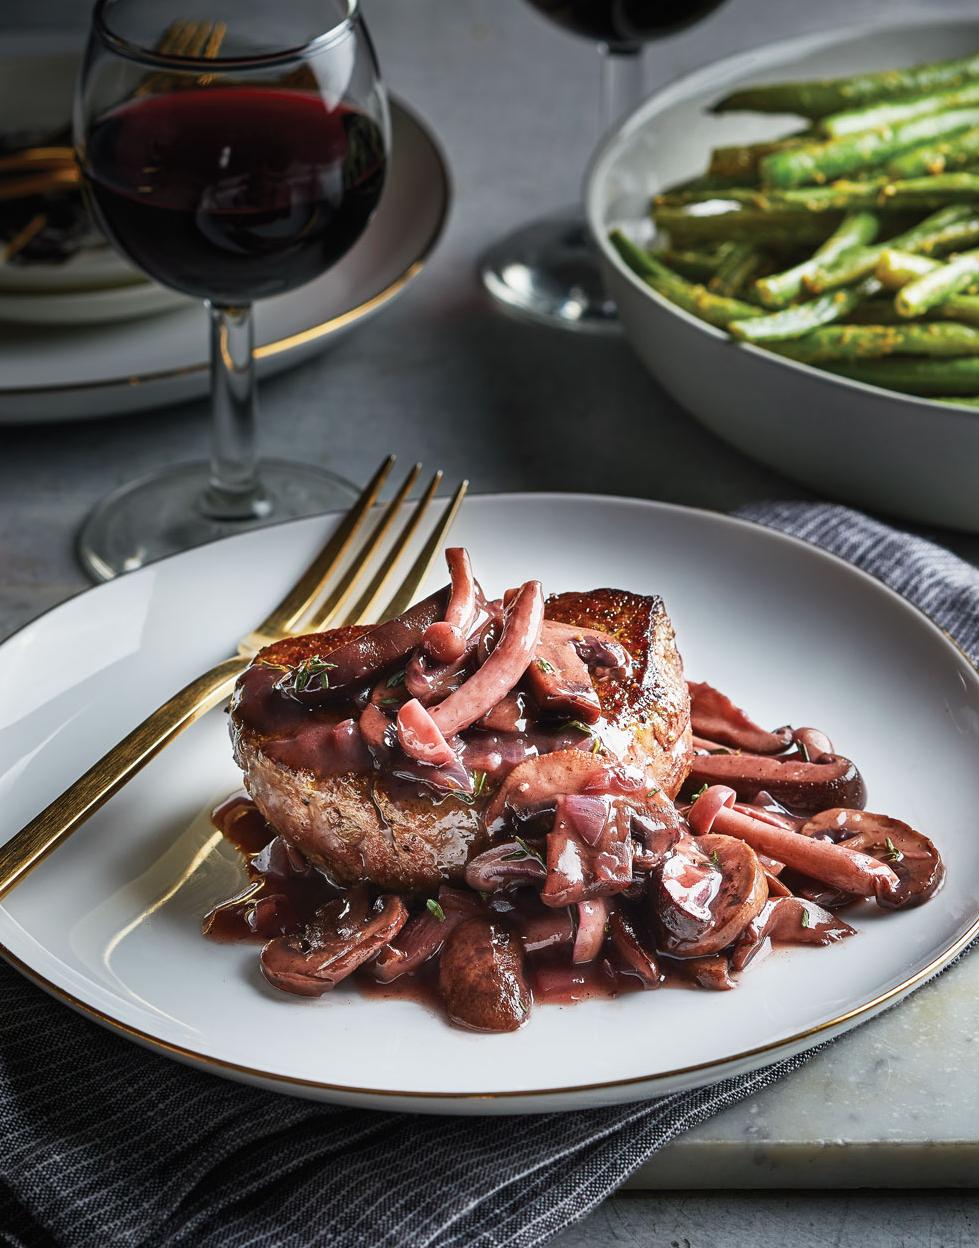  The juicy, succulent steaks pair perfectly with the rich, hearty mushroom wine sauce.